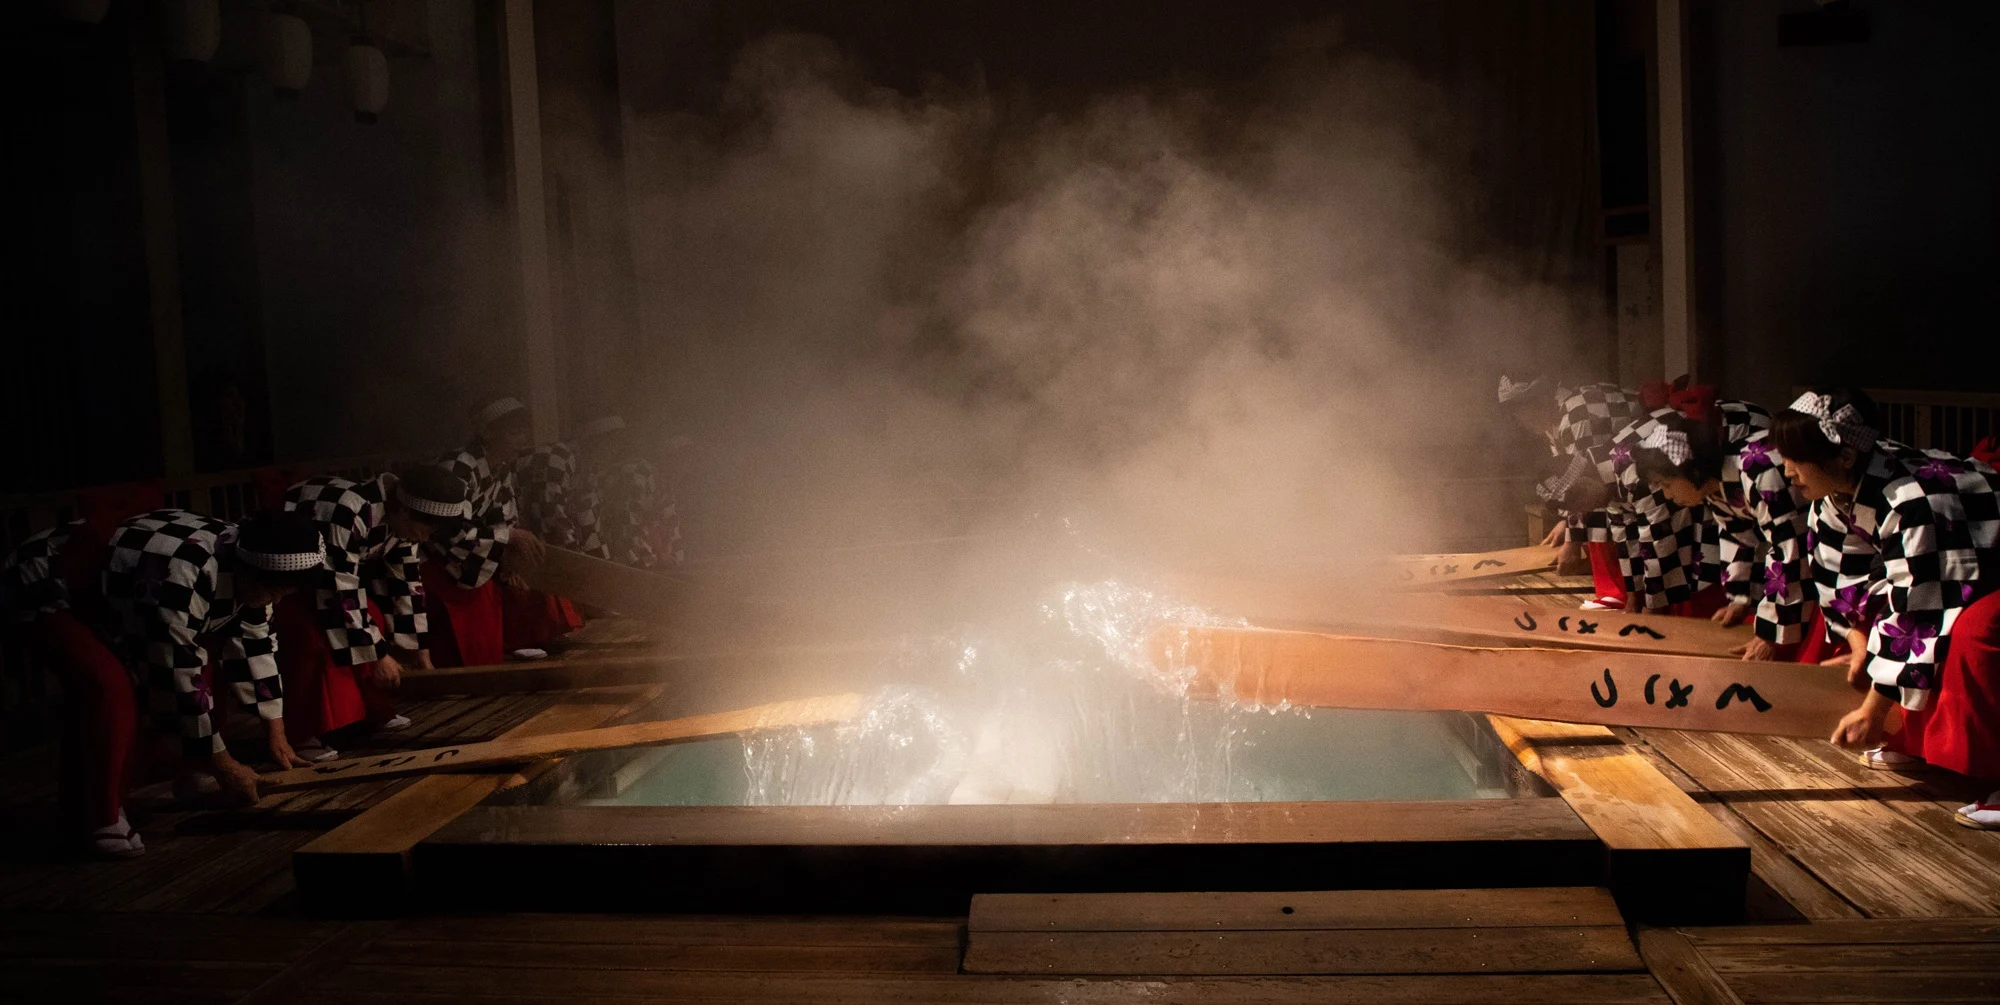 Turning off the lights allows the viewer to see the water and steam during the Yumomi ritual.